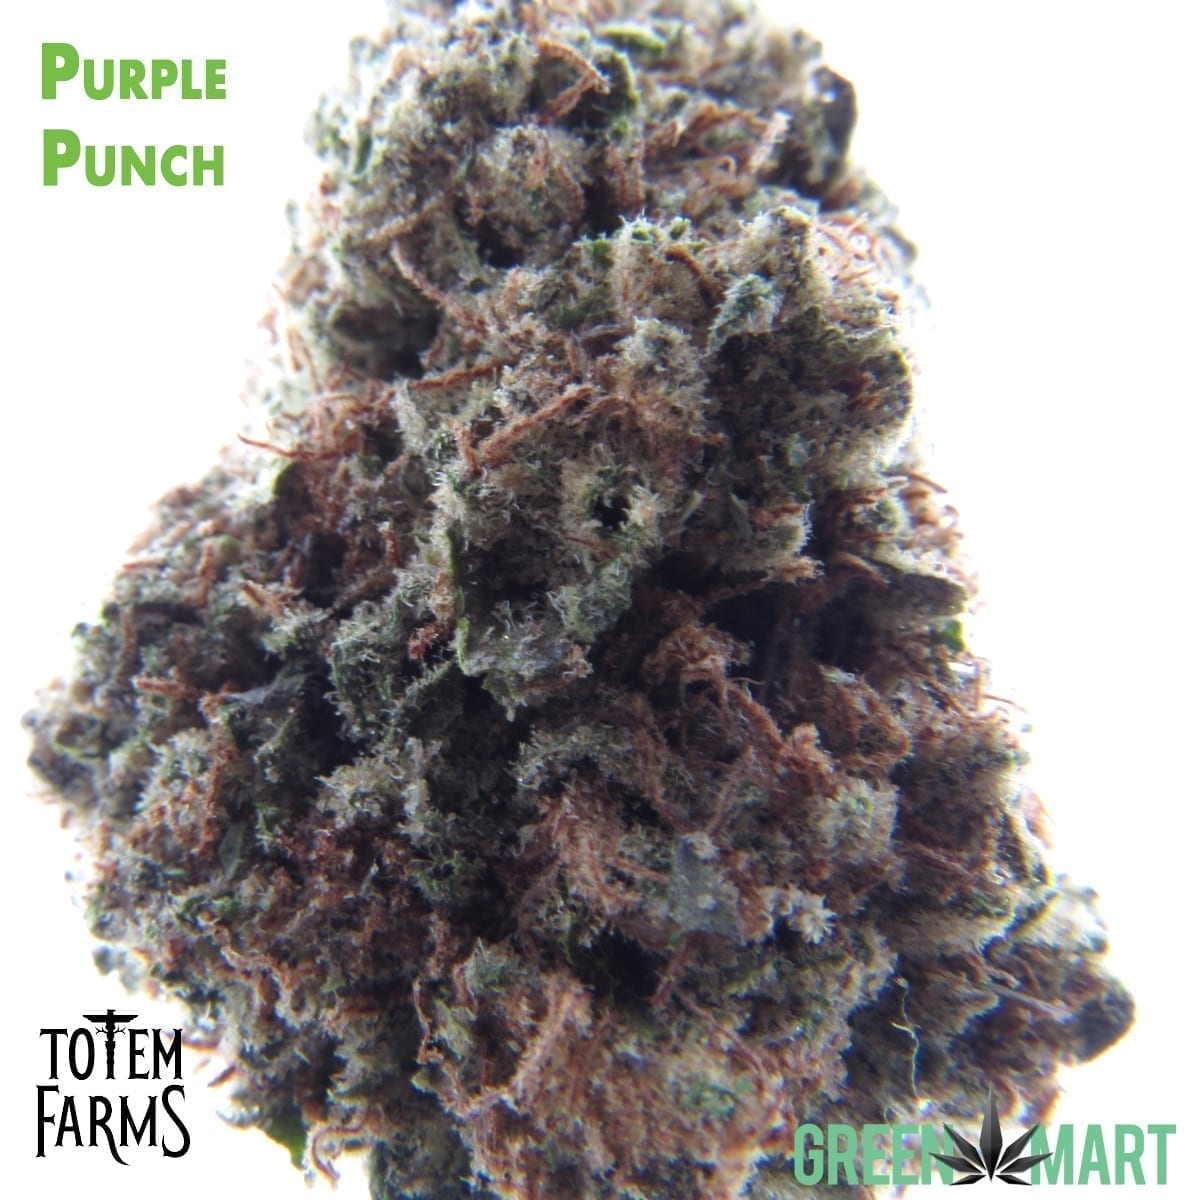 Purple Punch by Totem Farms